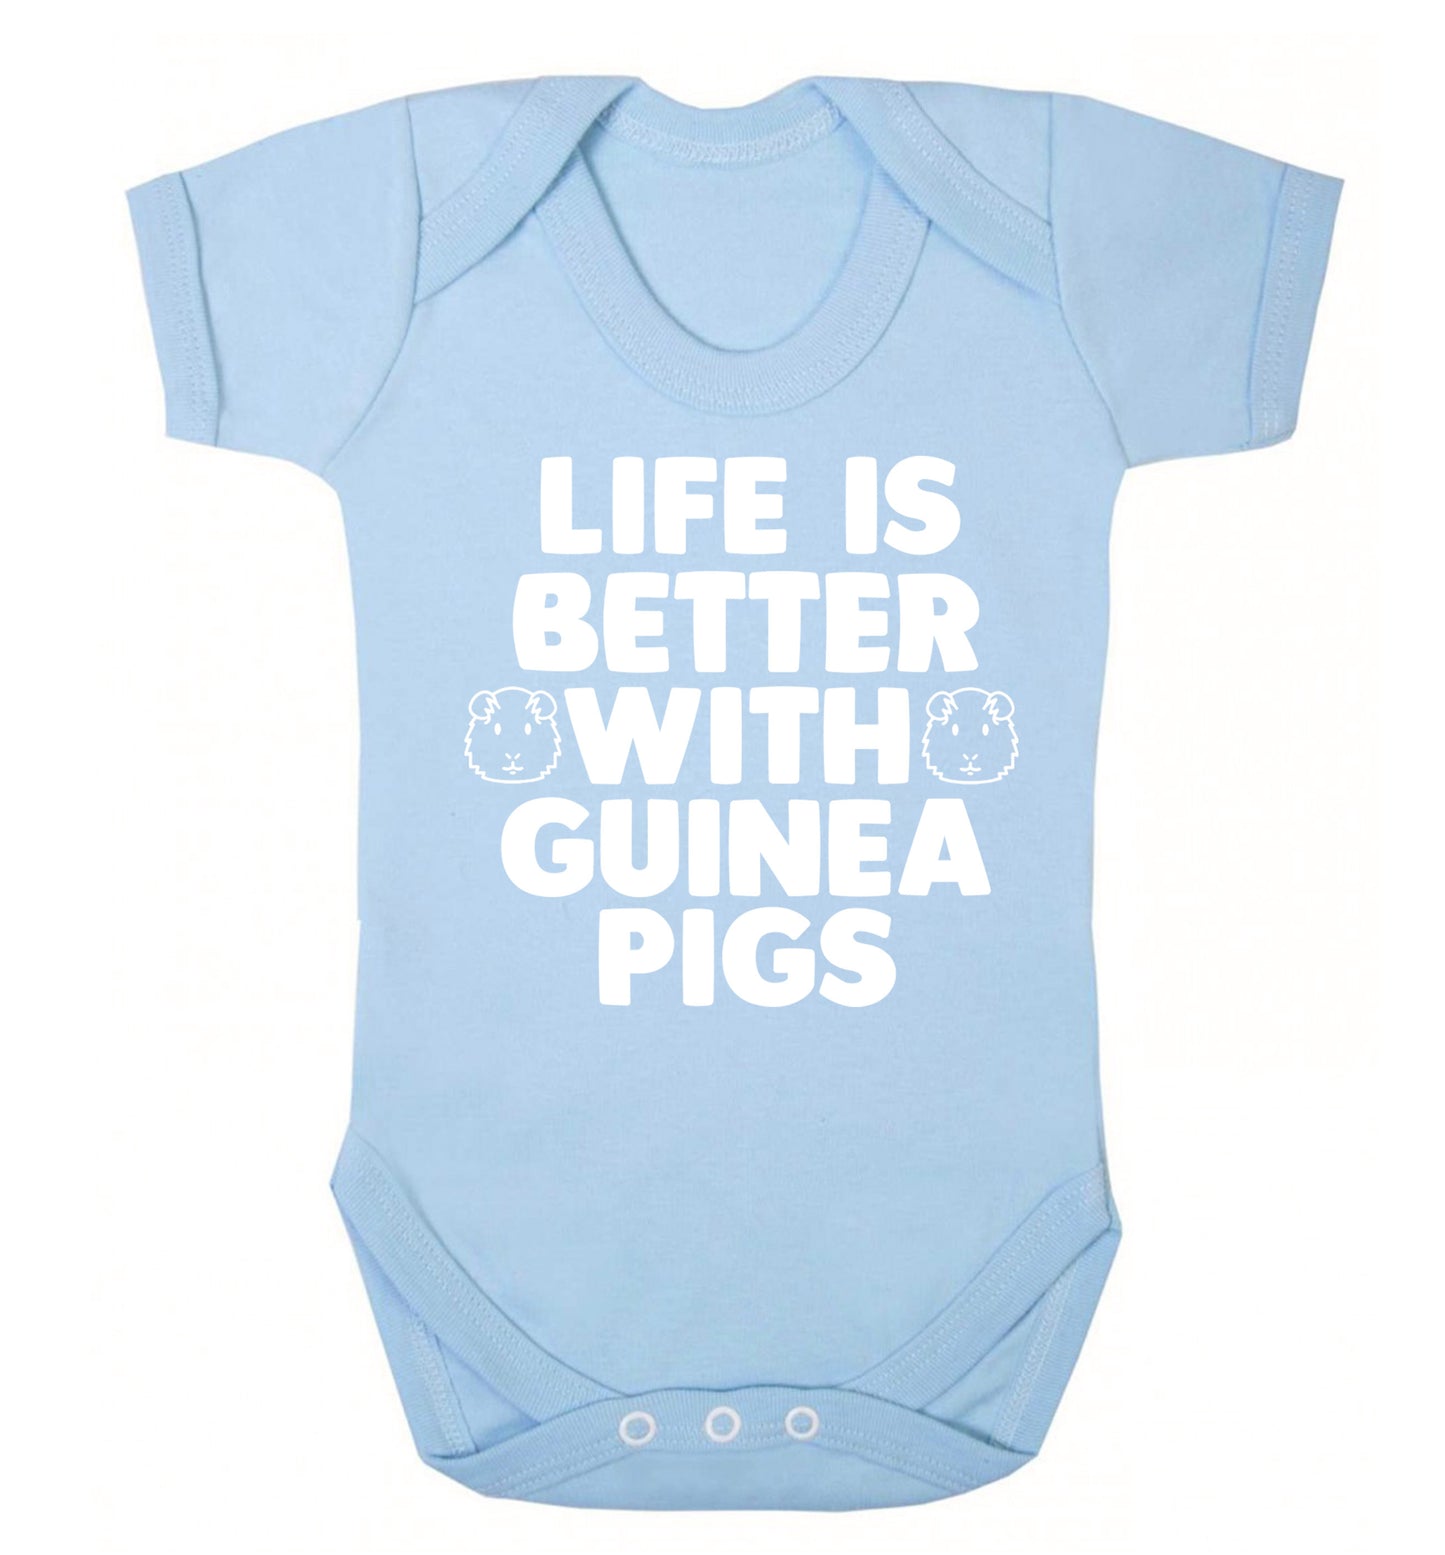 Life is better with guinea pigs Baby Vest pale blue 18-24 months